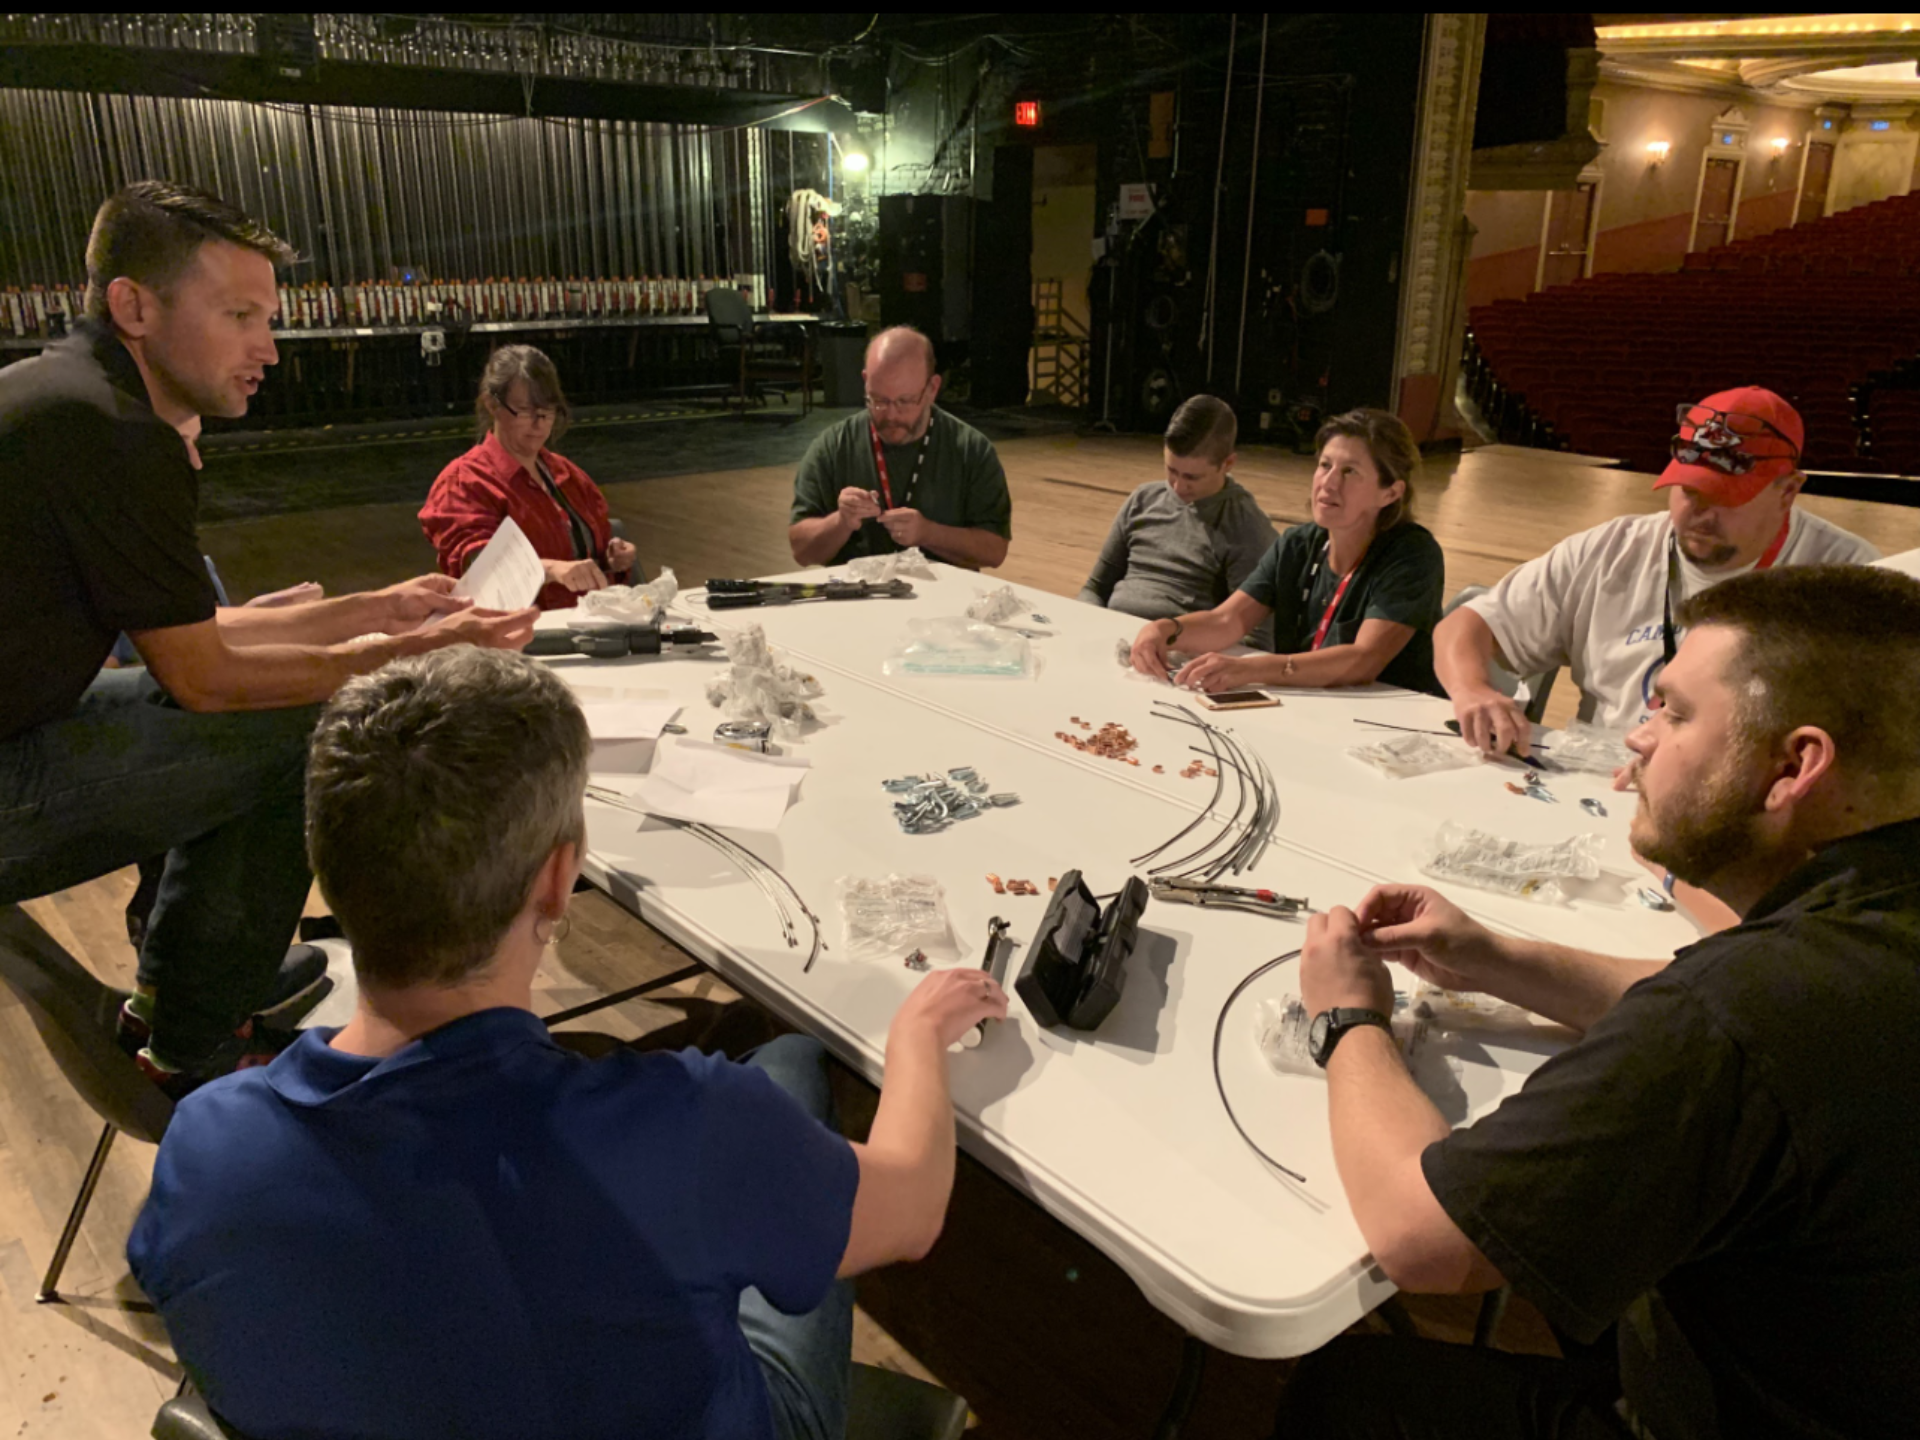 Glerum Masterclass participants sit with trainer at table on a stage learning rigging basics